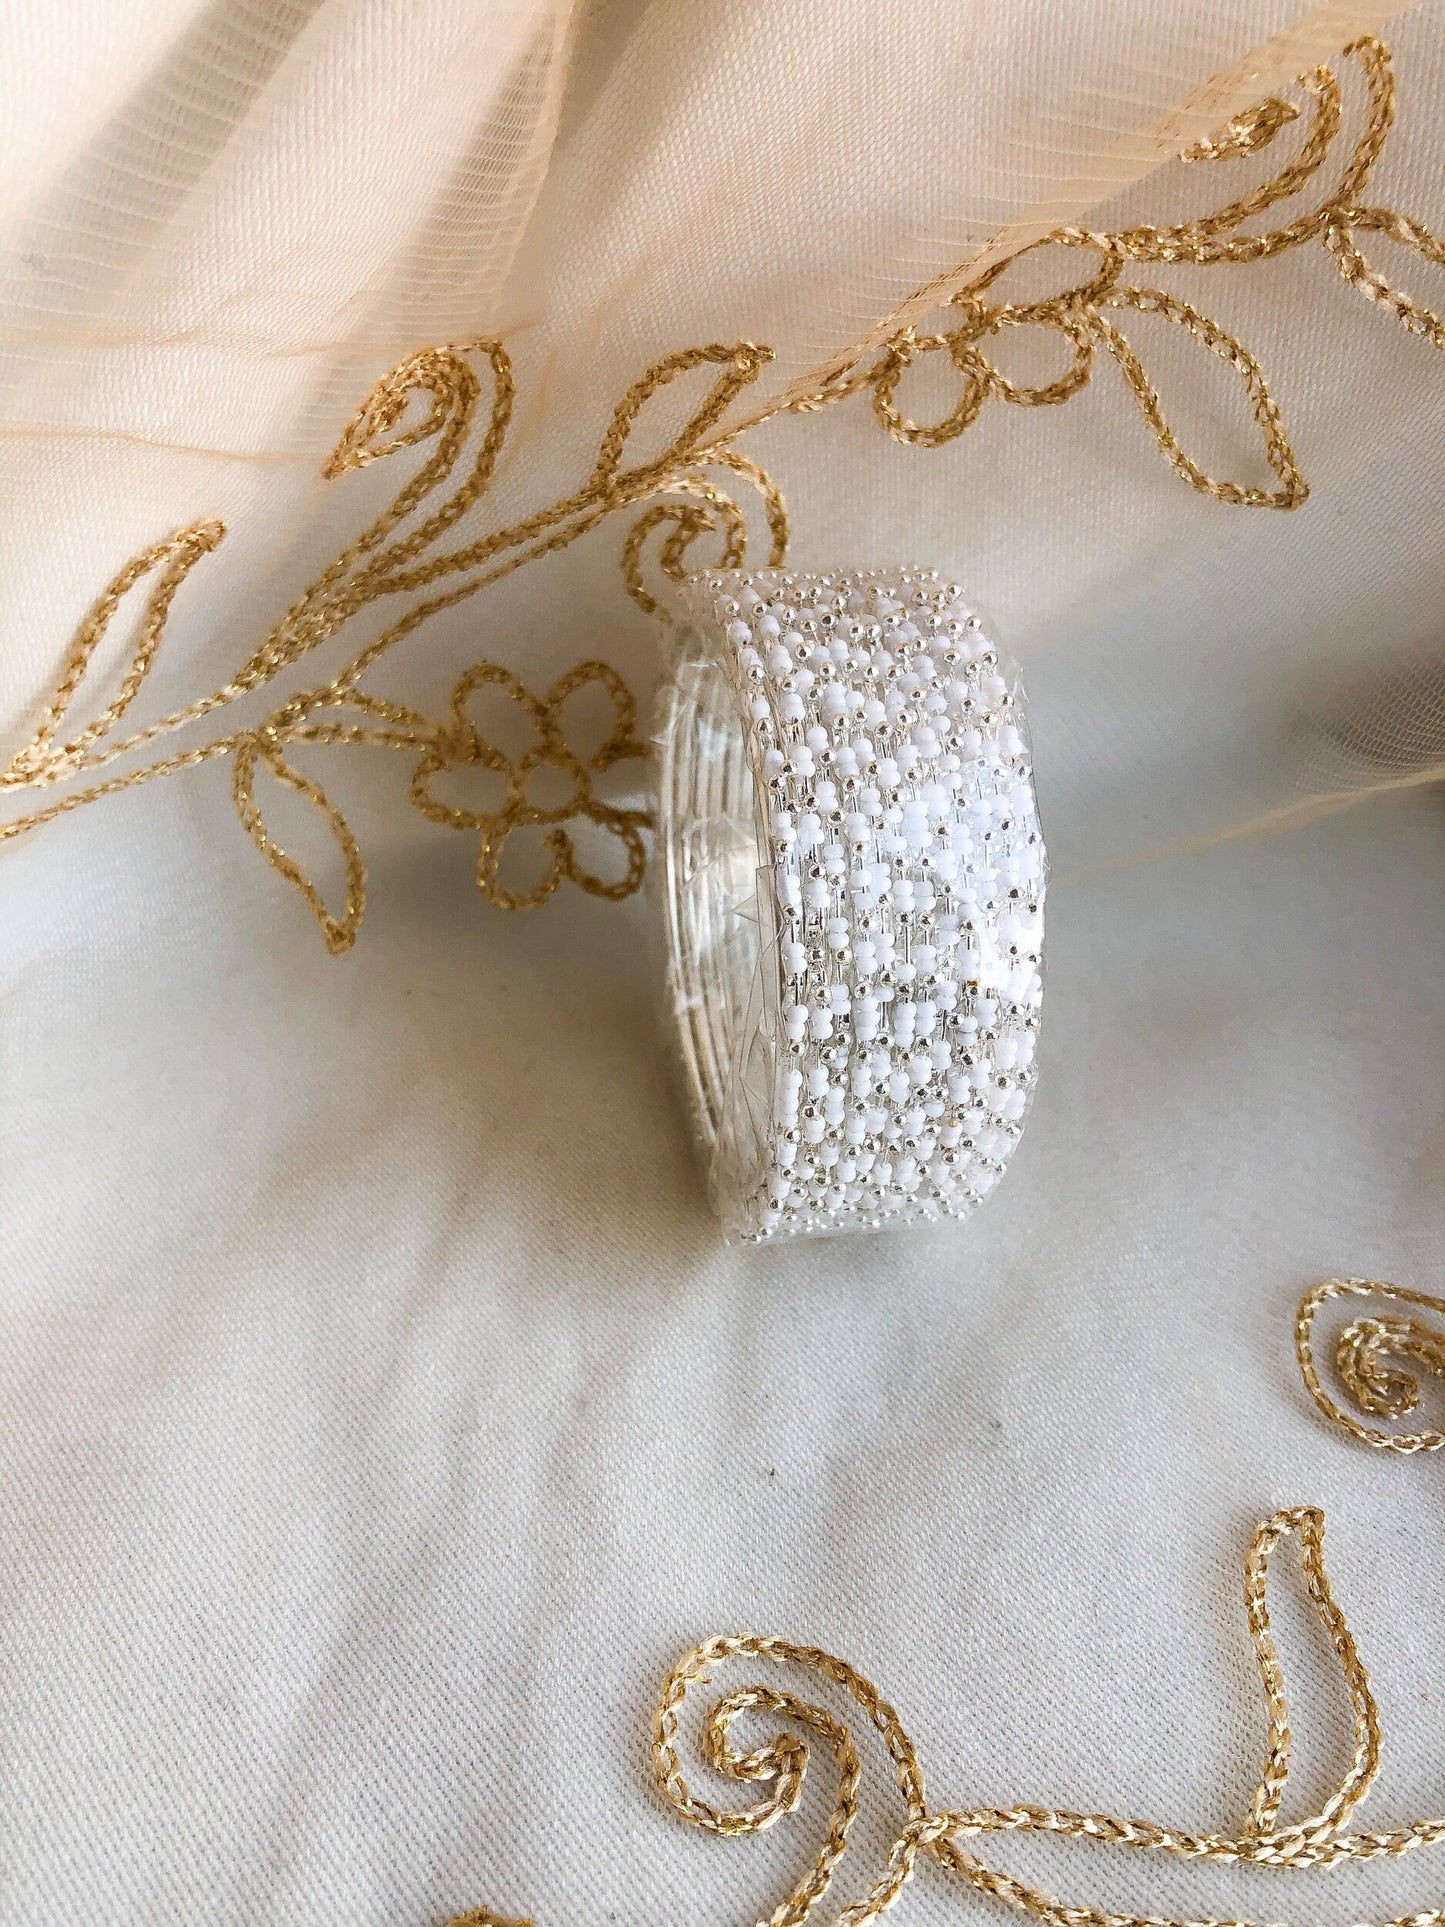 White and Silver beaded bangles - 12 pack